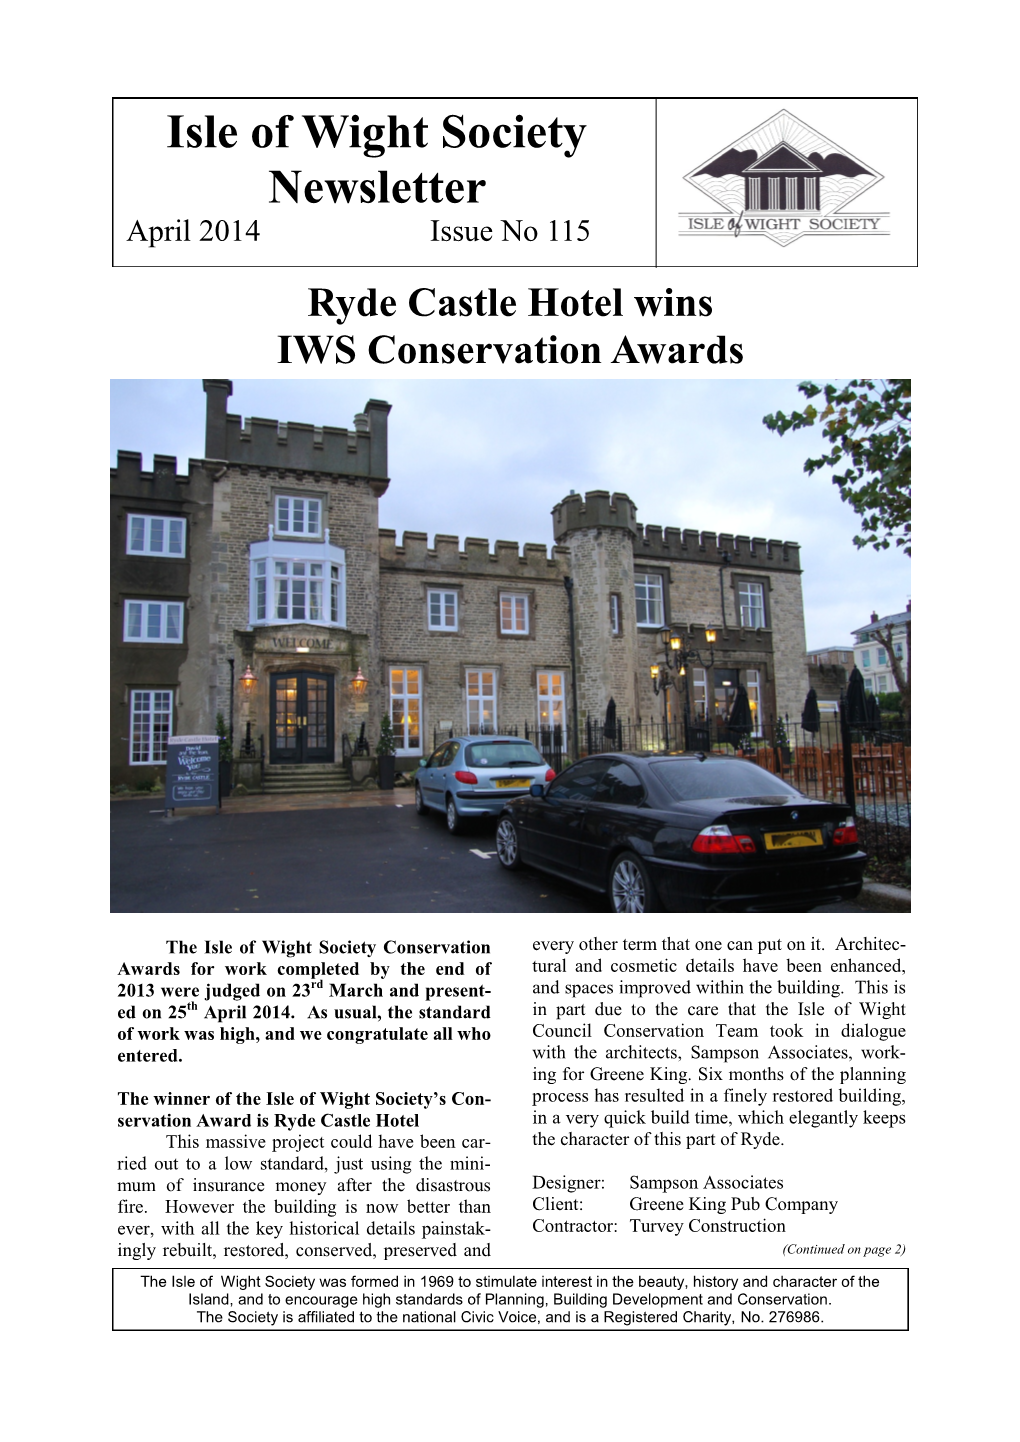 Isle of Wight Society Newsletter April 2014 Issue No 115 Ryde Castle Hotel Wins IWS Conservation Awards